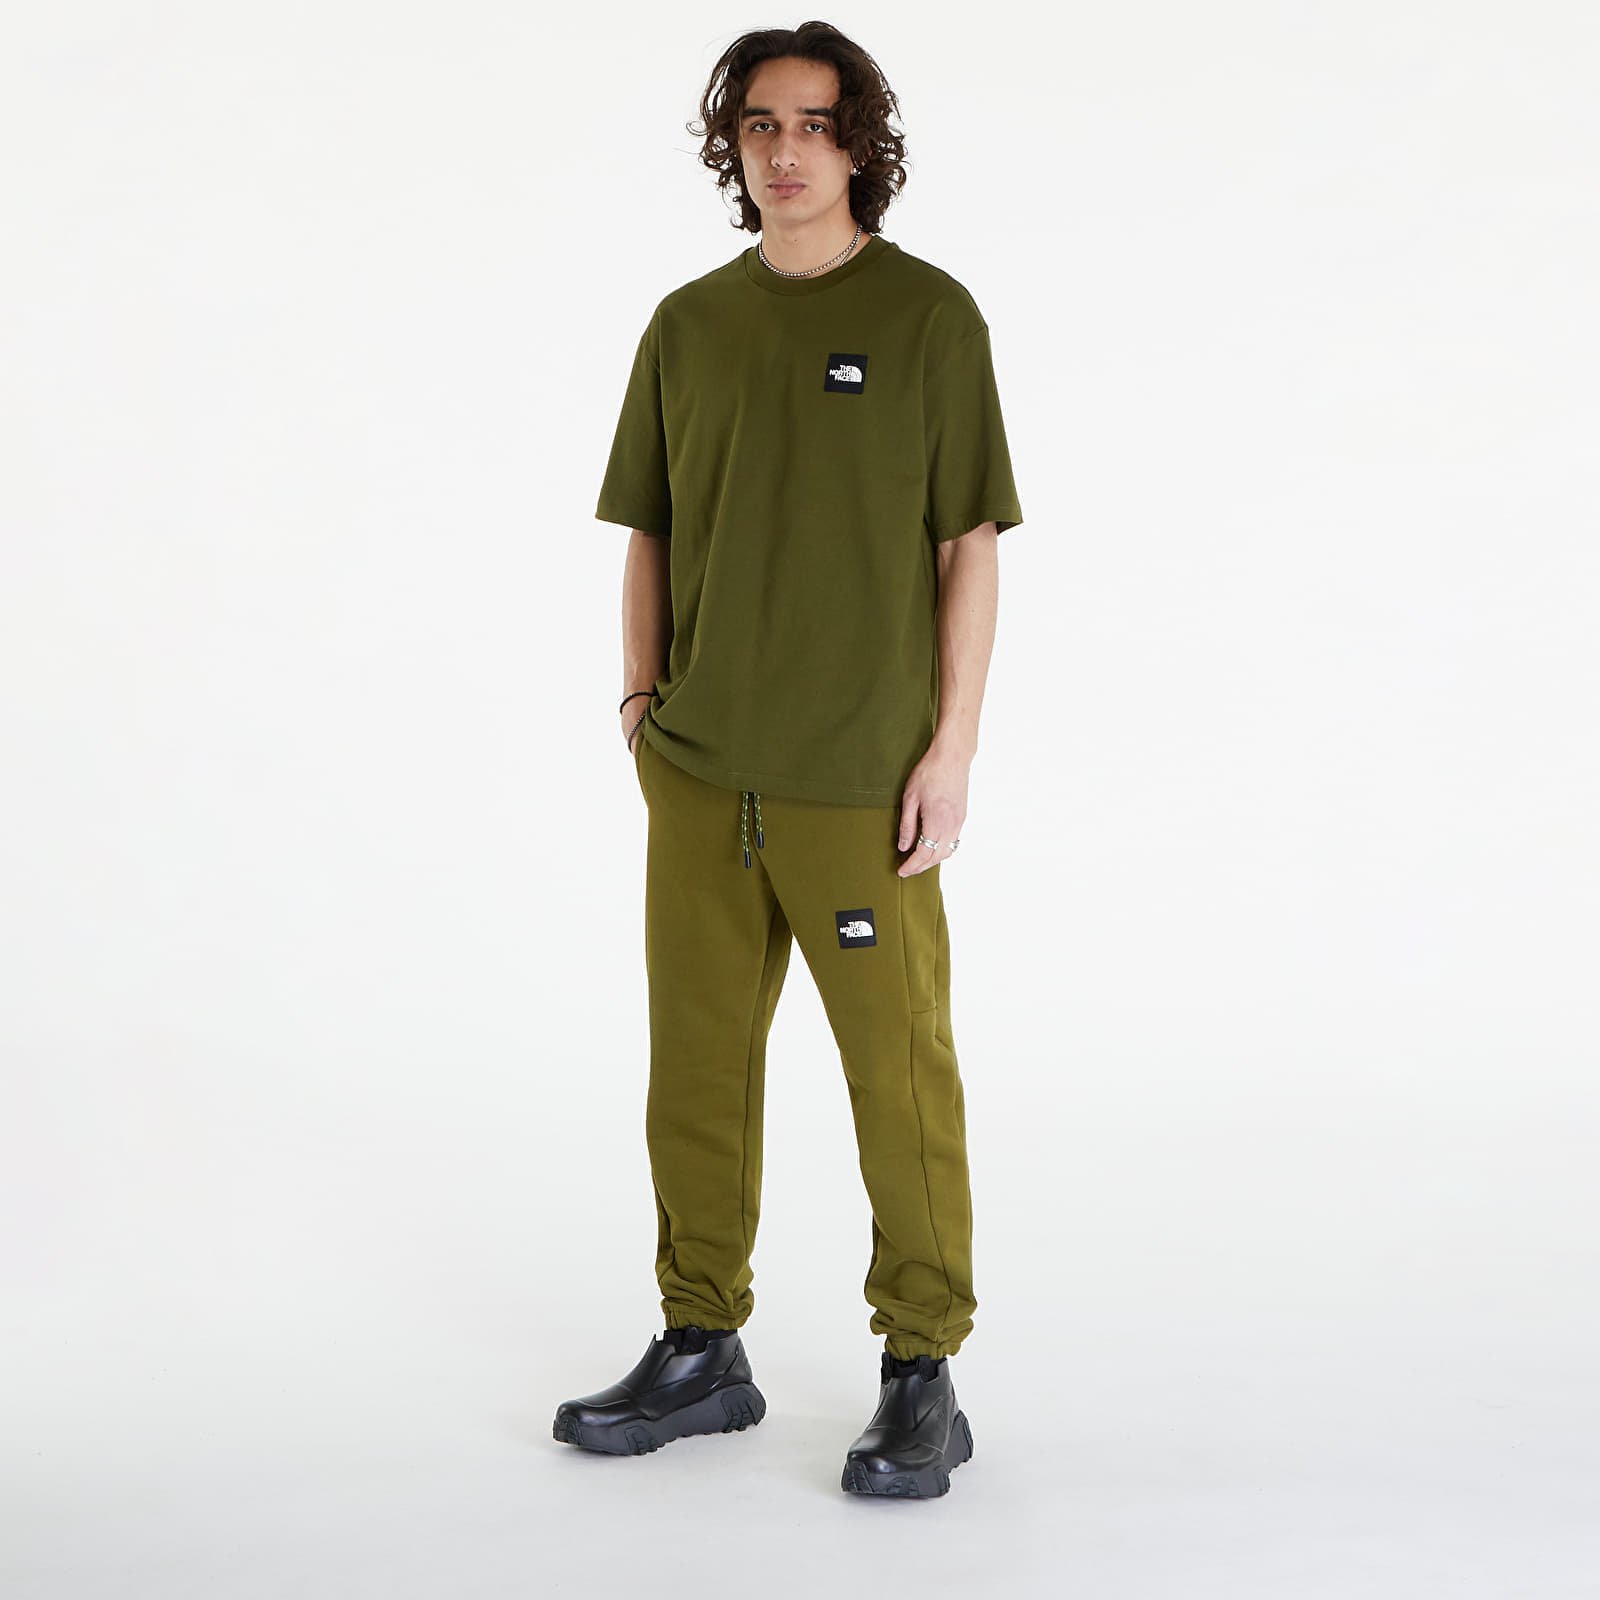 NSE Patch T-Shirt in Forest Olive